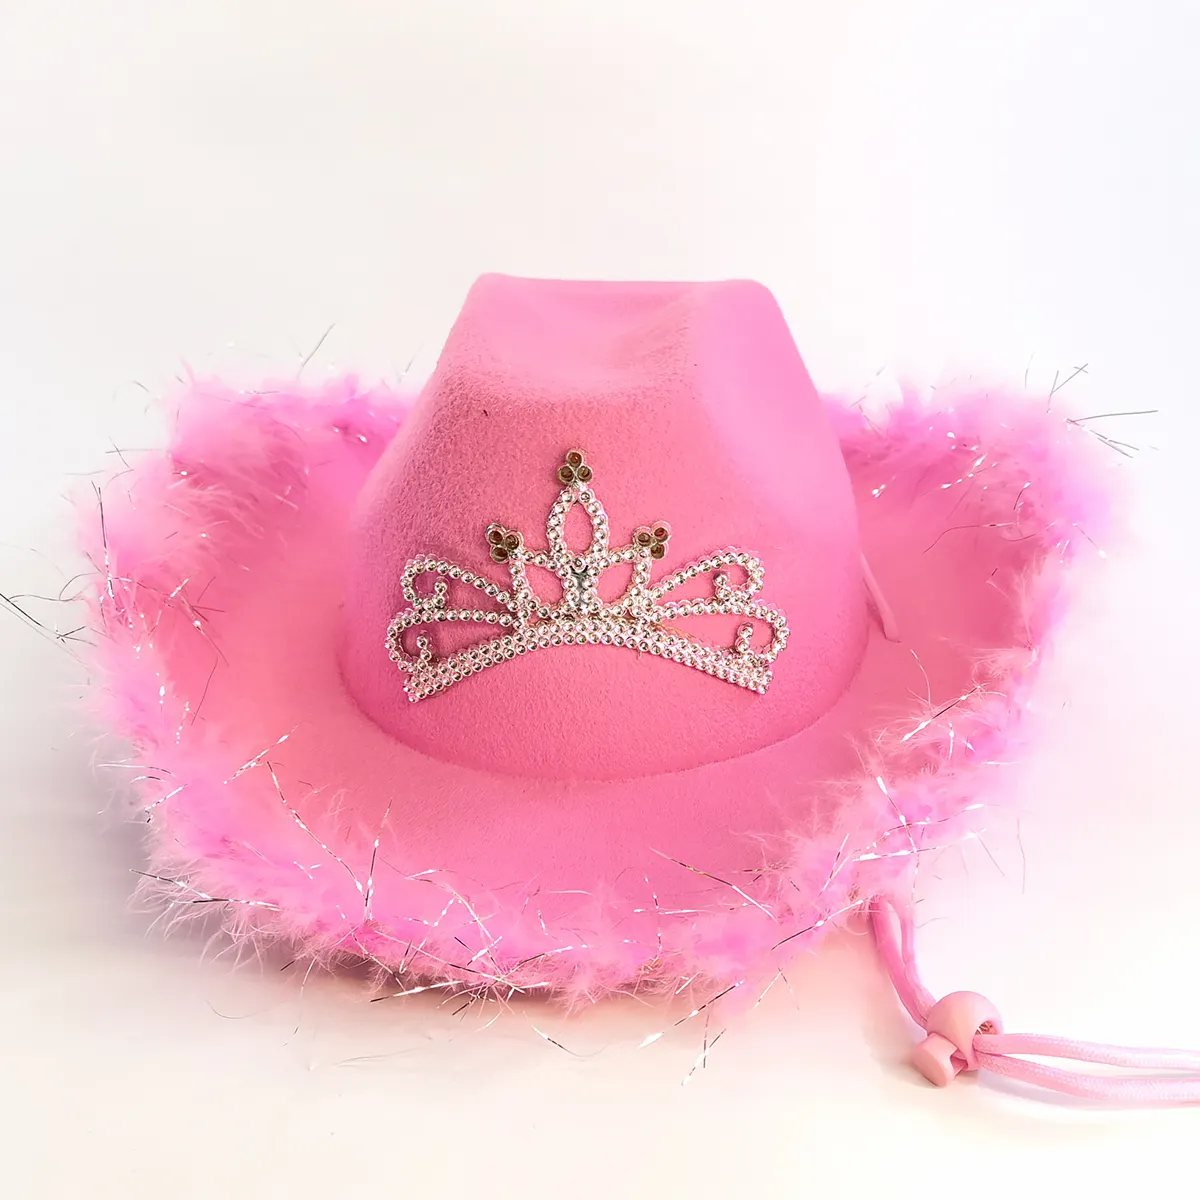 LED Light Up Halloween Christmas Festival Party Hats Cosplay Costume Hats Rough Feather Brim Pink Western Cowboy Hat